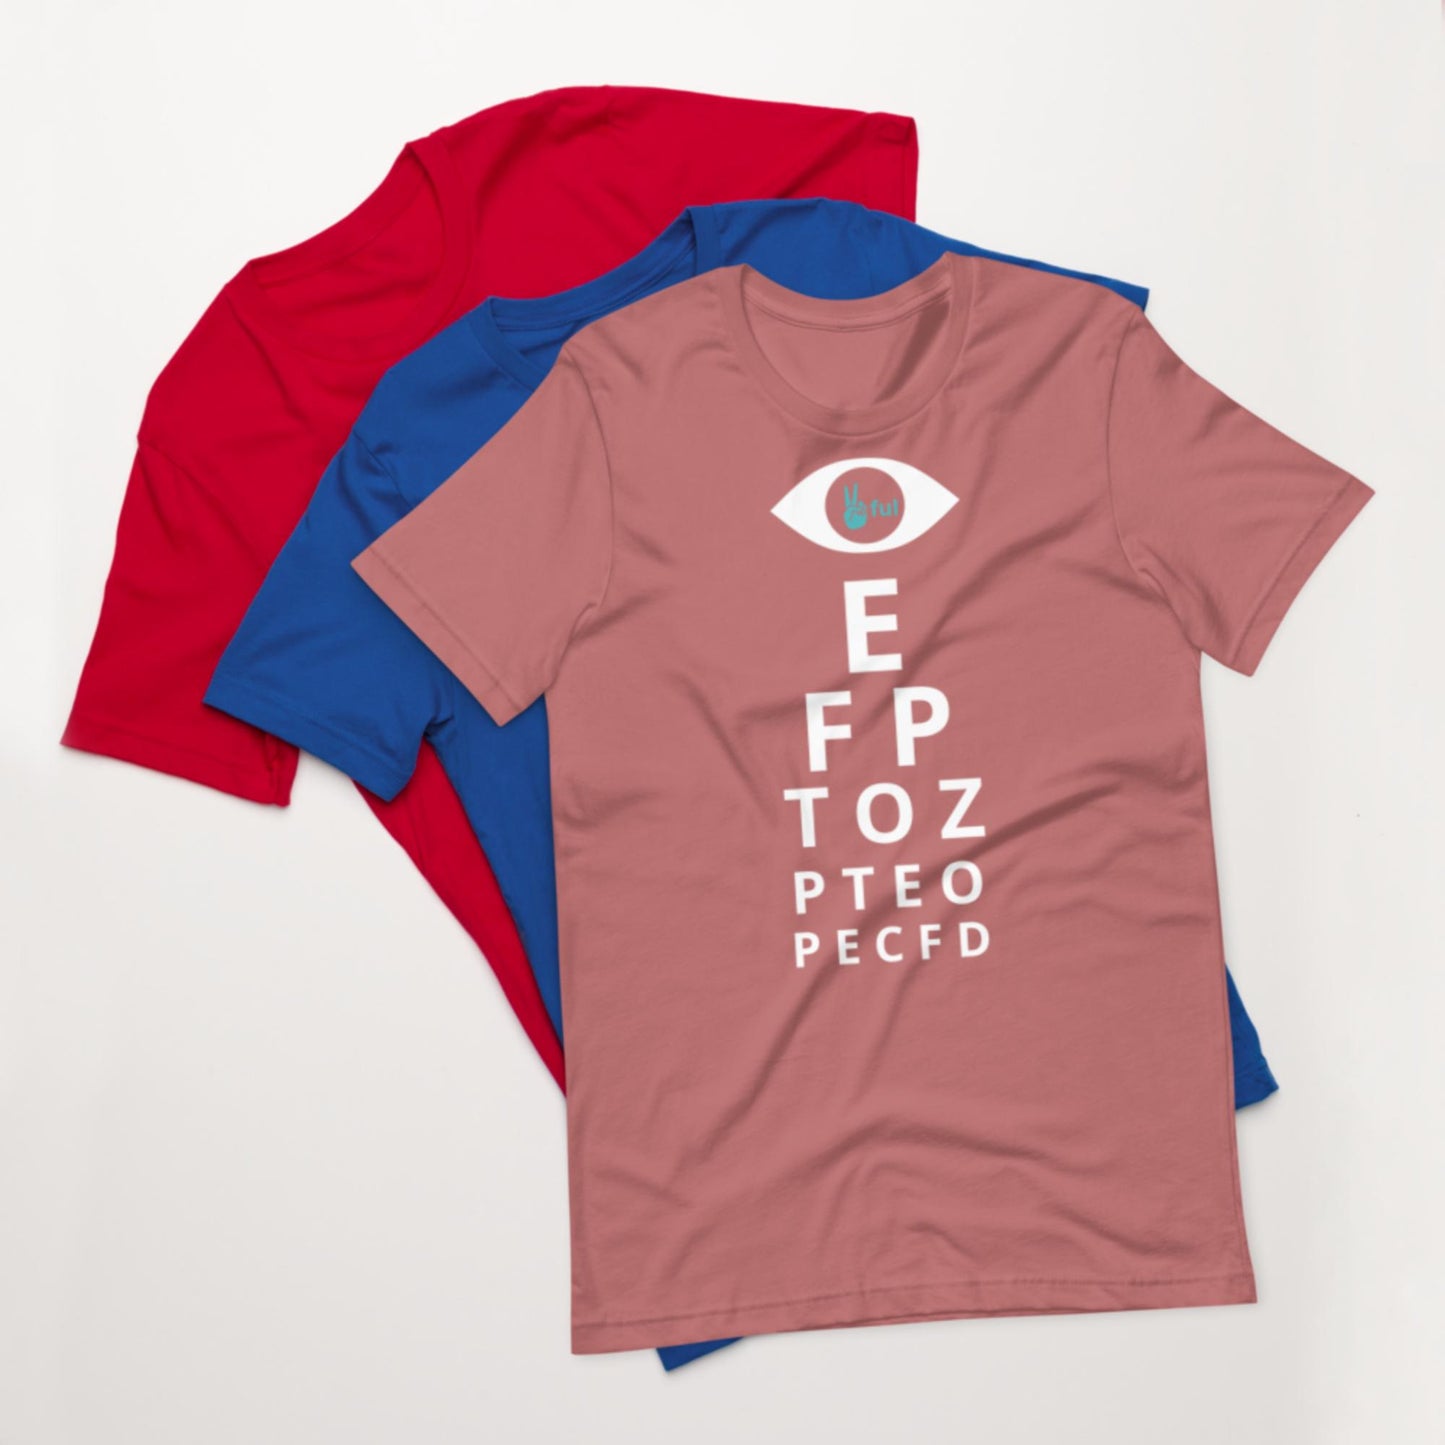 Find the Peaceful things shirt XS-5XL